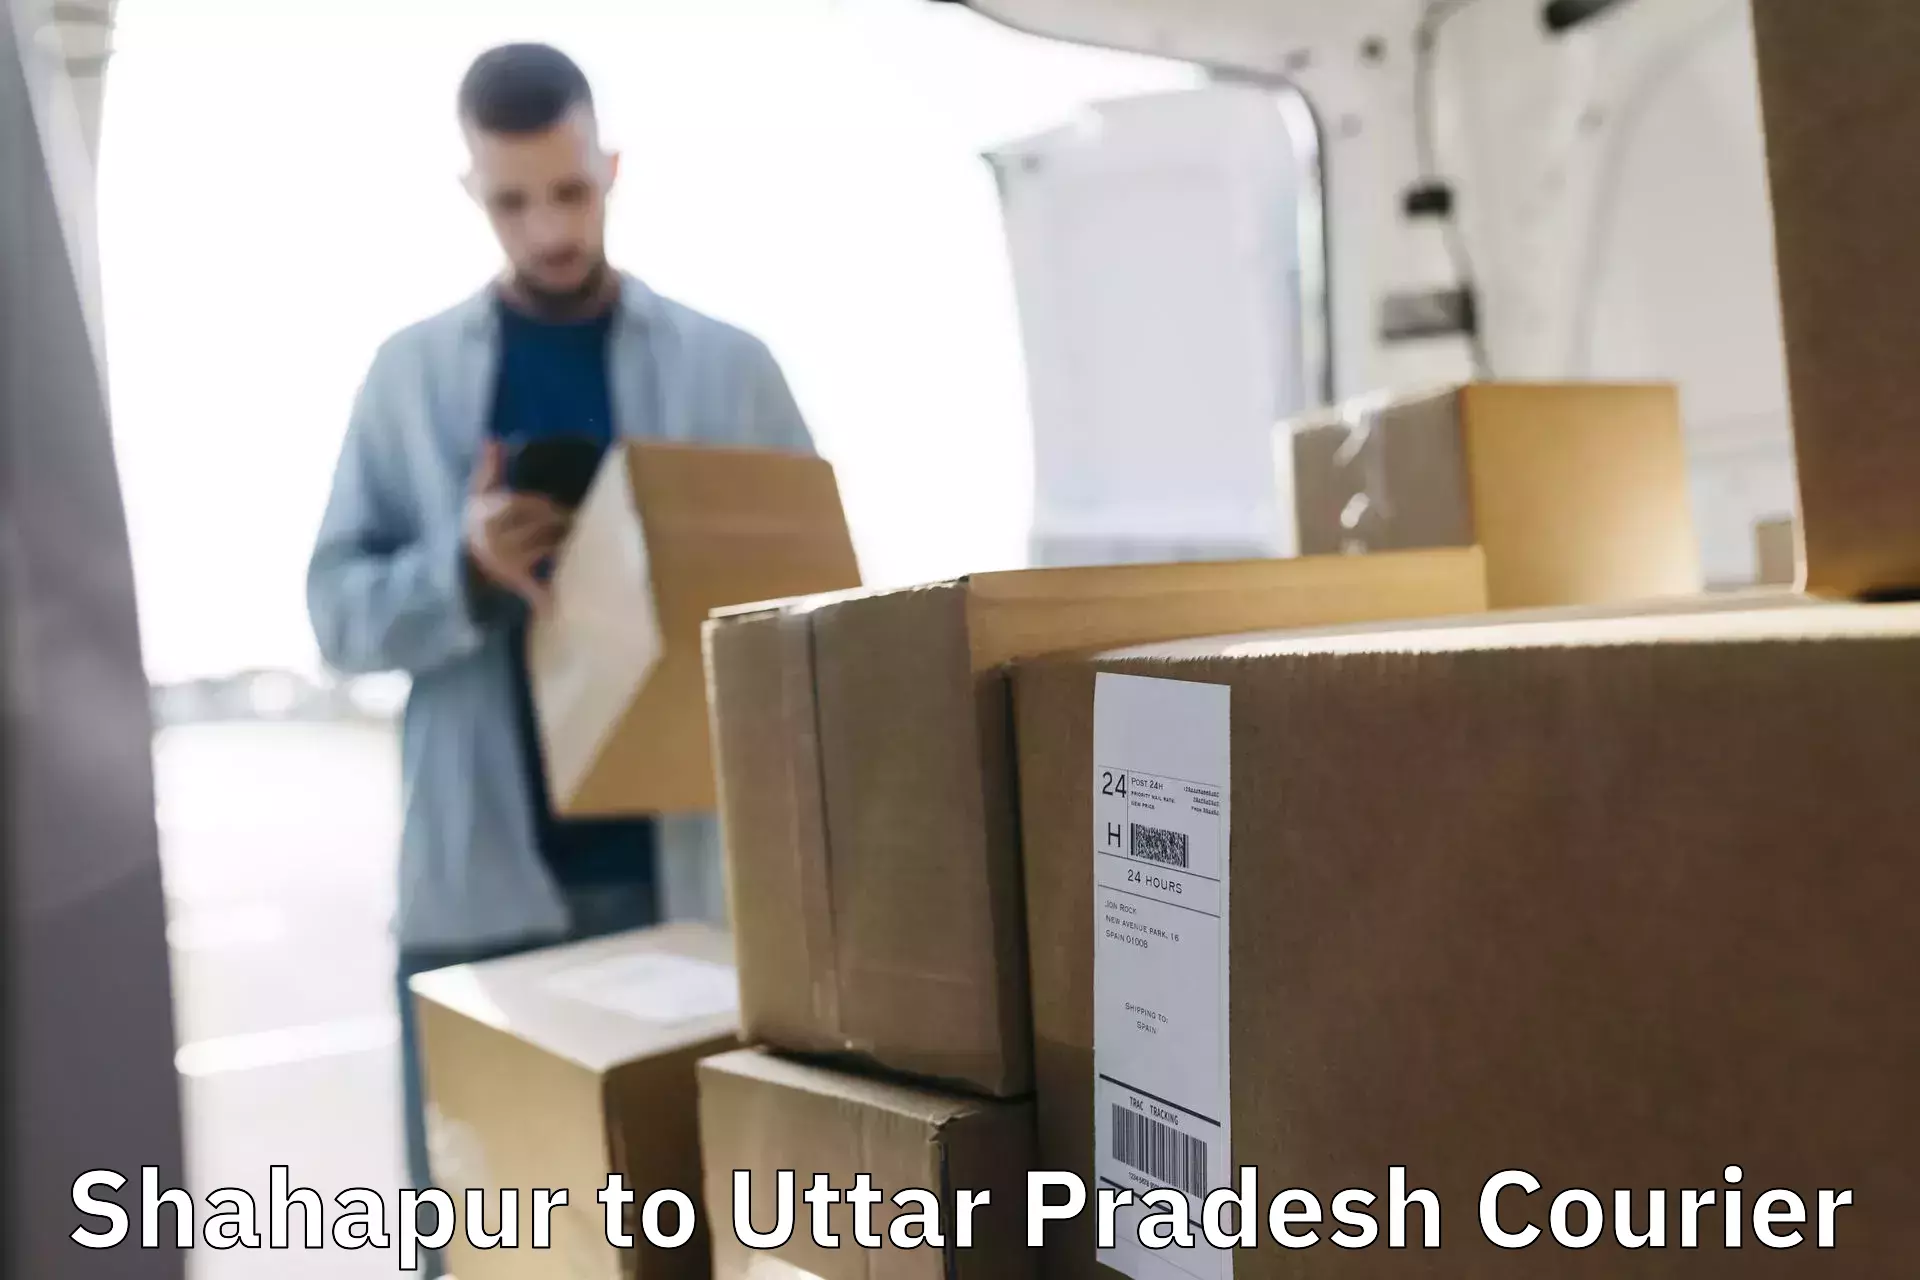 Efficient package consolidation in Shahapur to Fatehpur